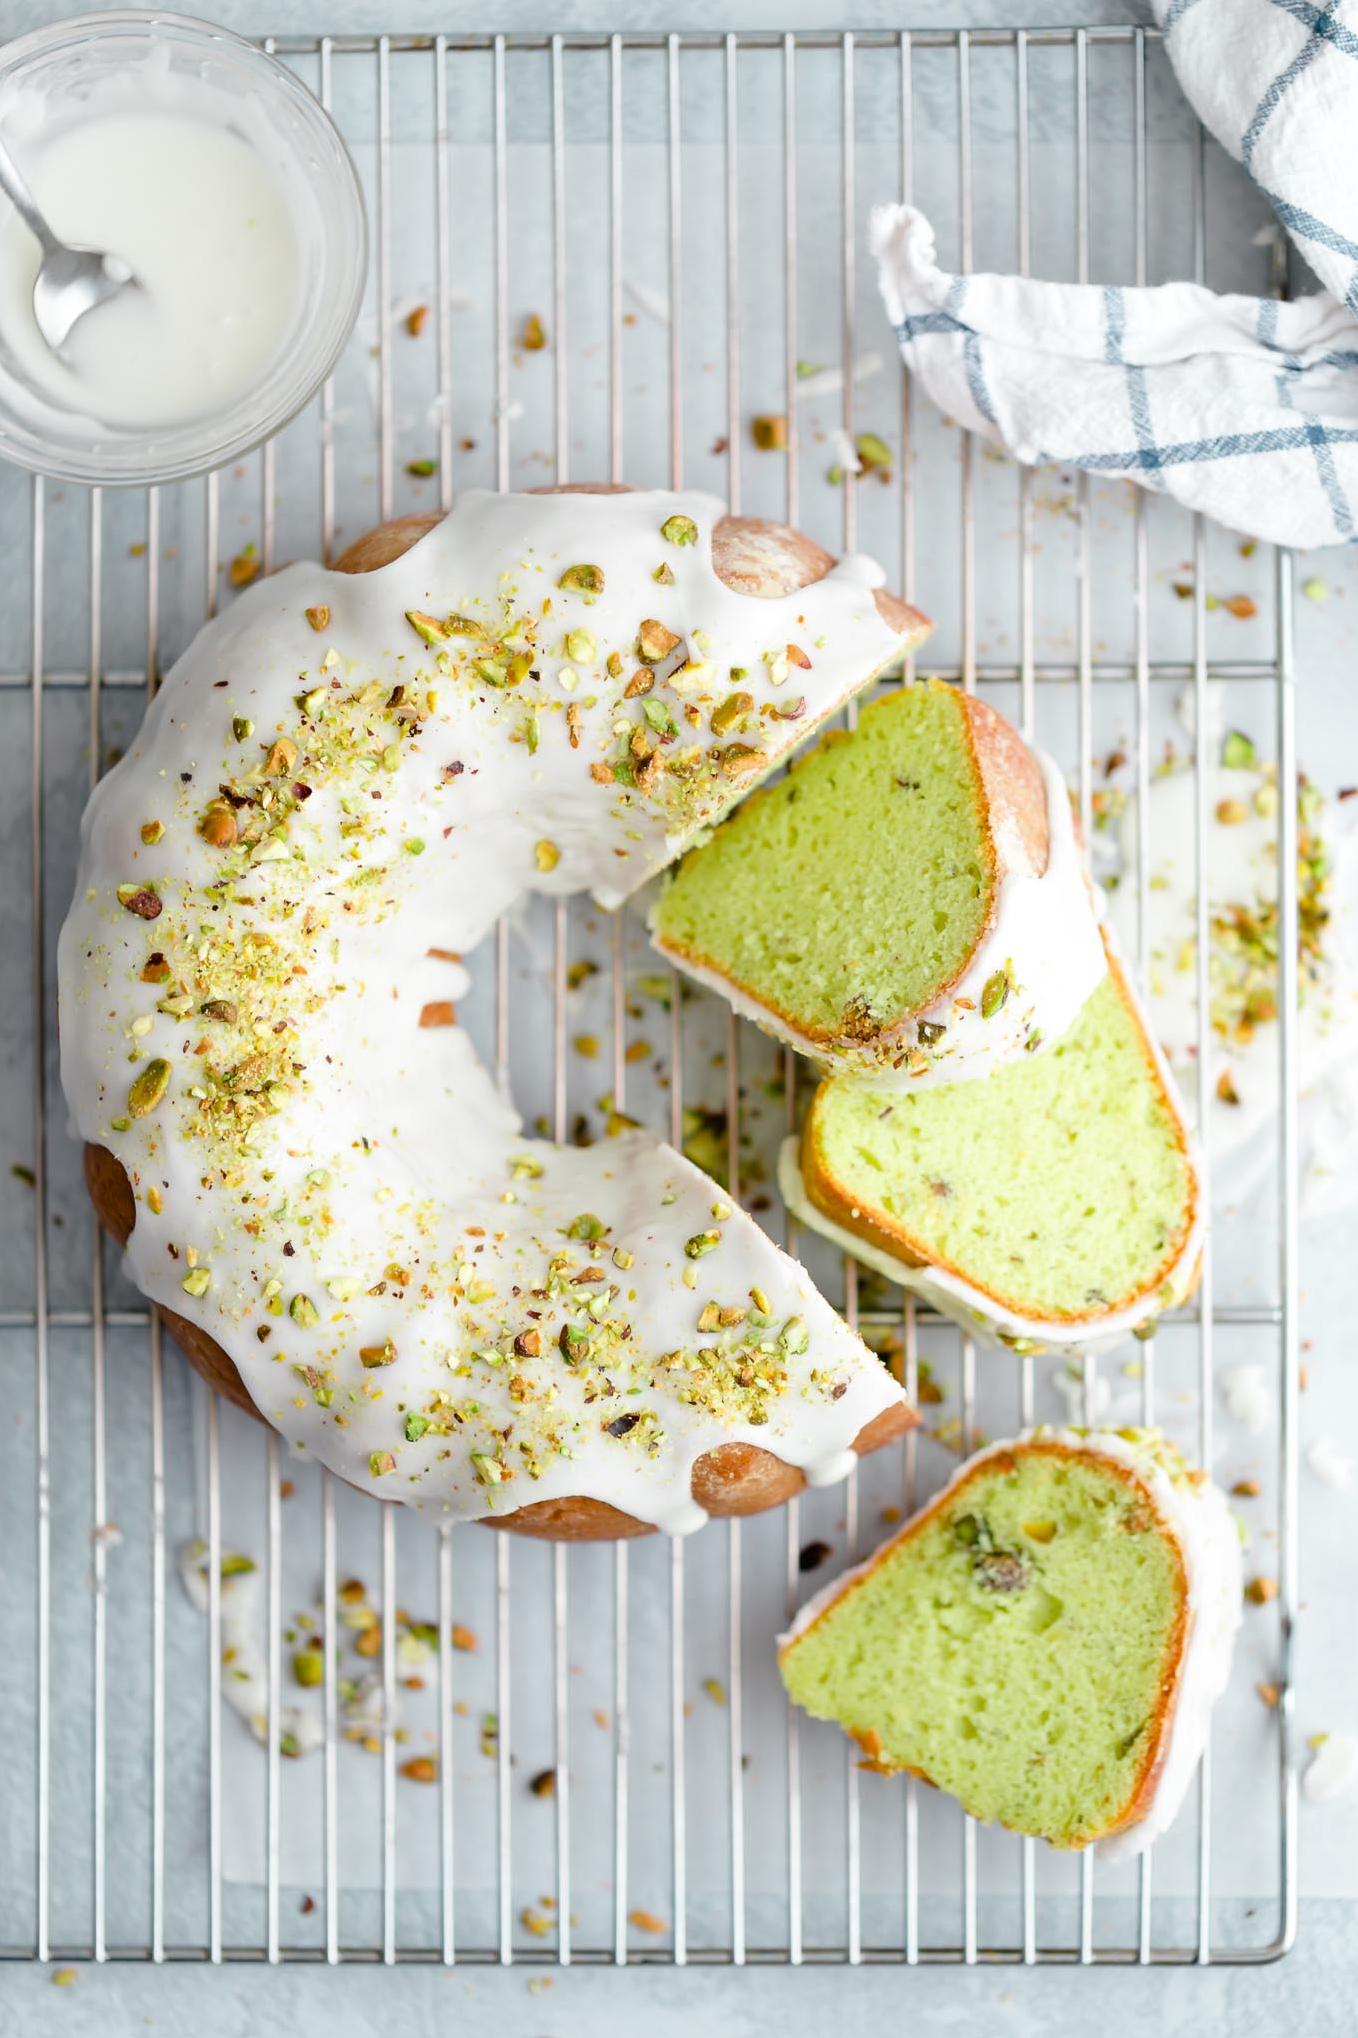  This Pistachio Pound Cake will quickly become your new favorite treat.